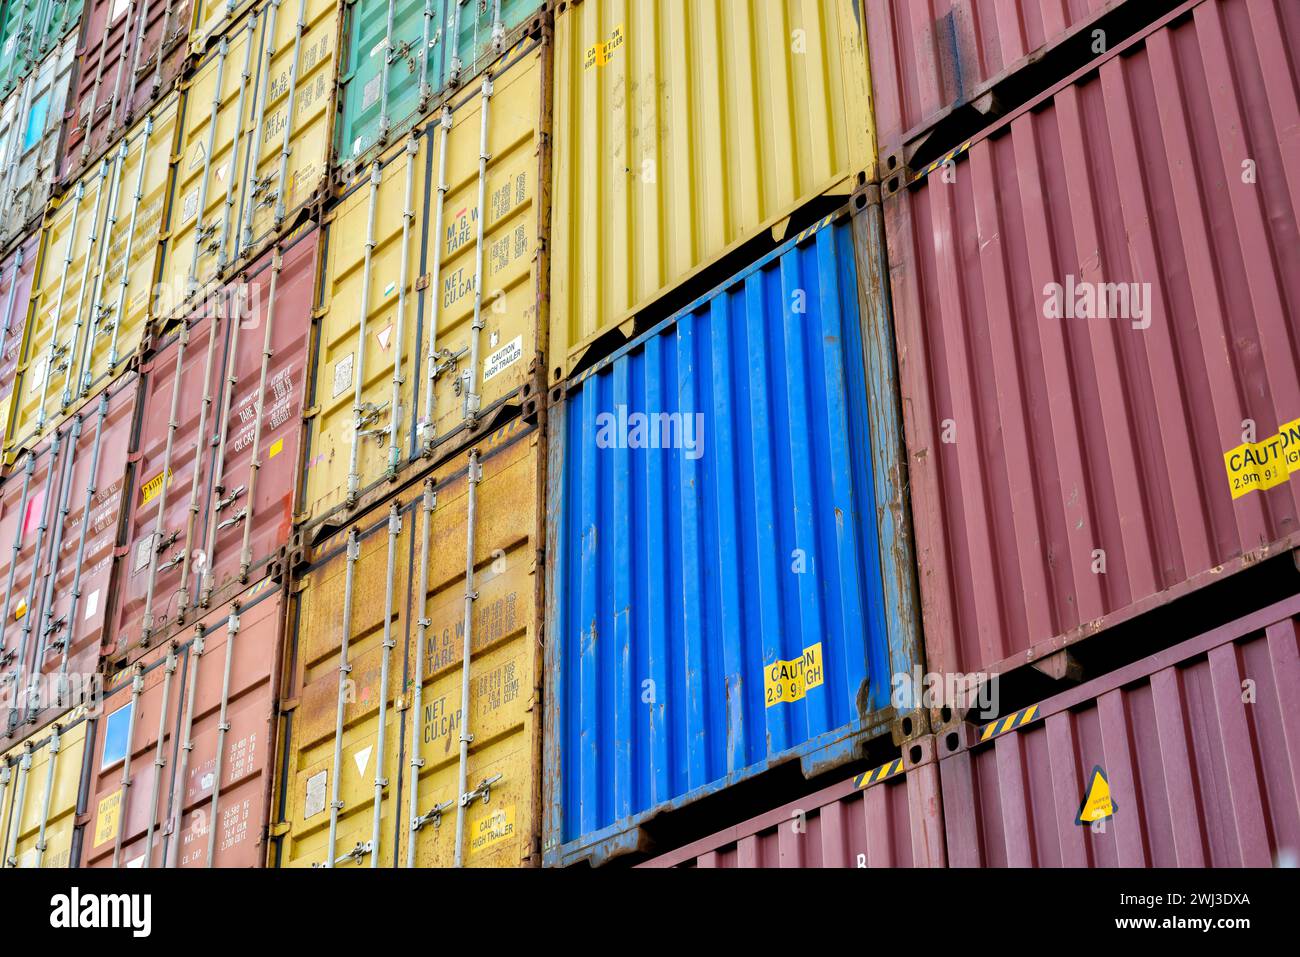 Standard shipping containers in a container terminal Stock Photo